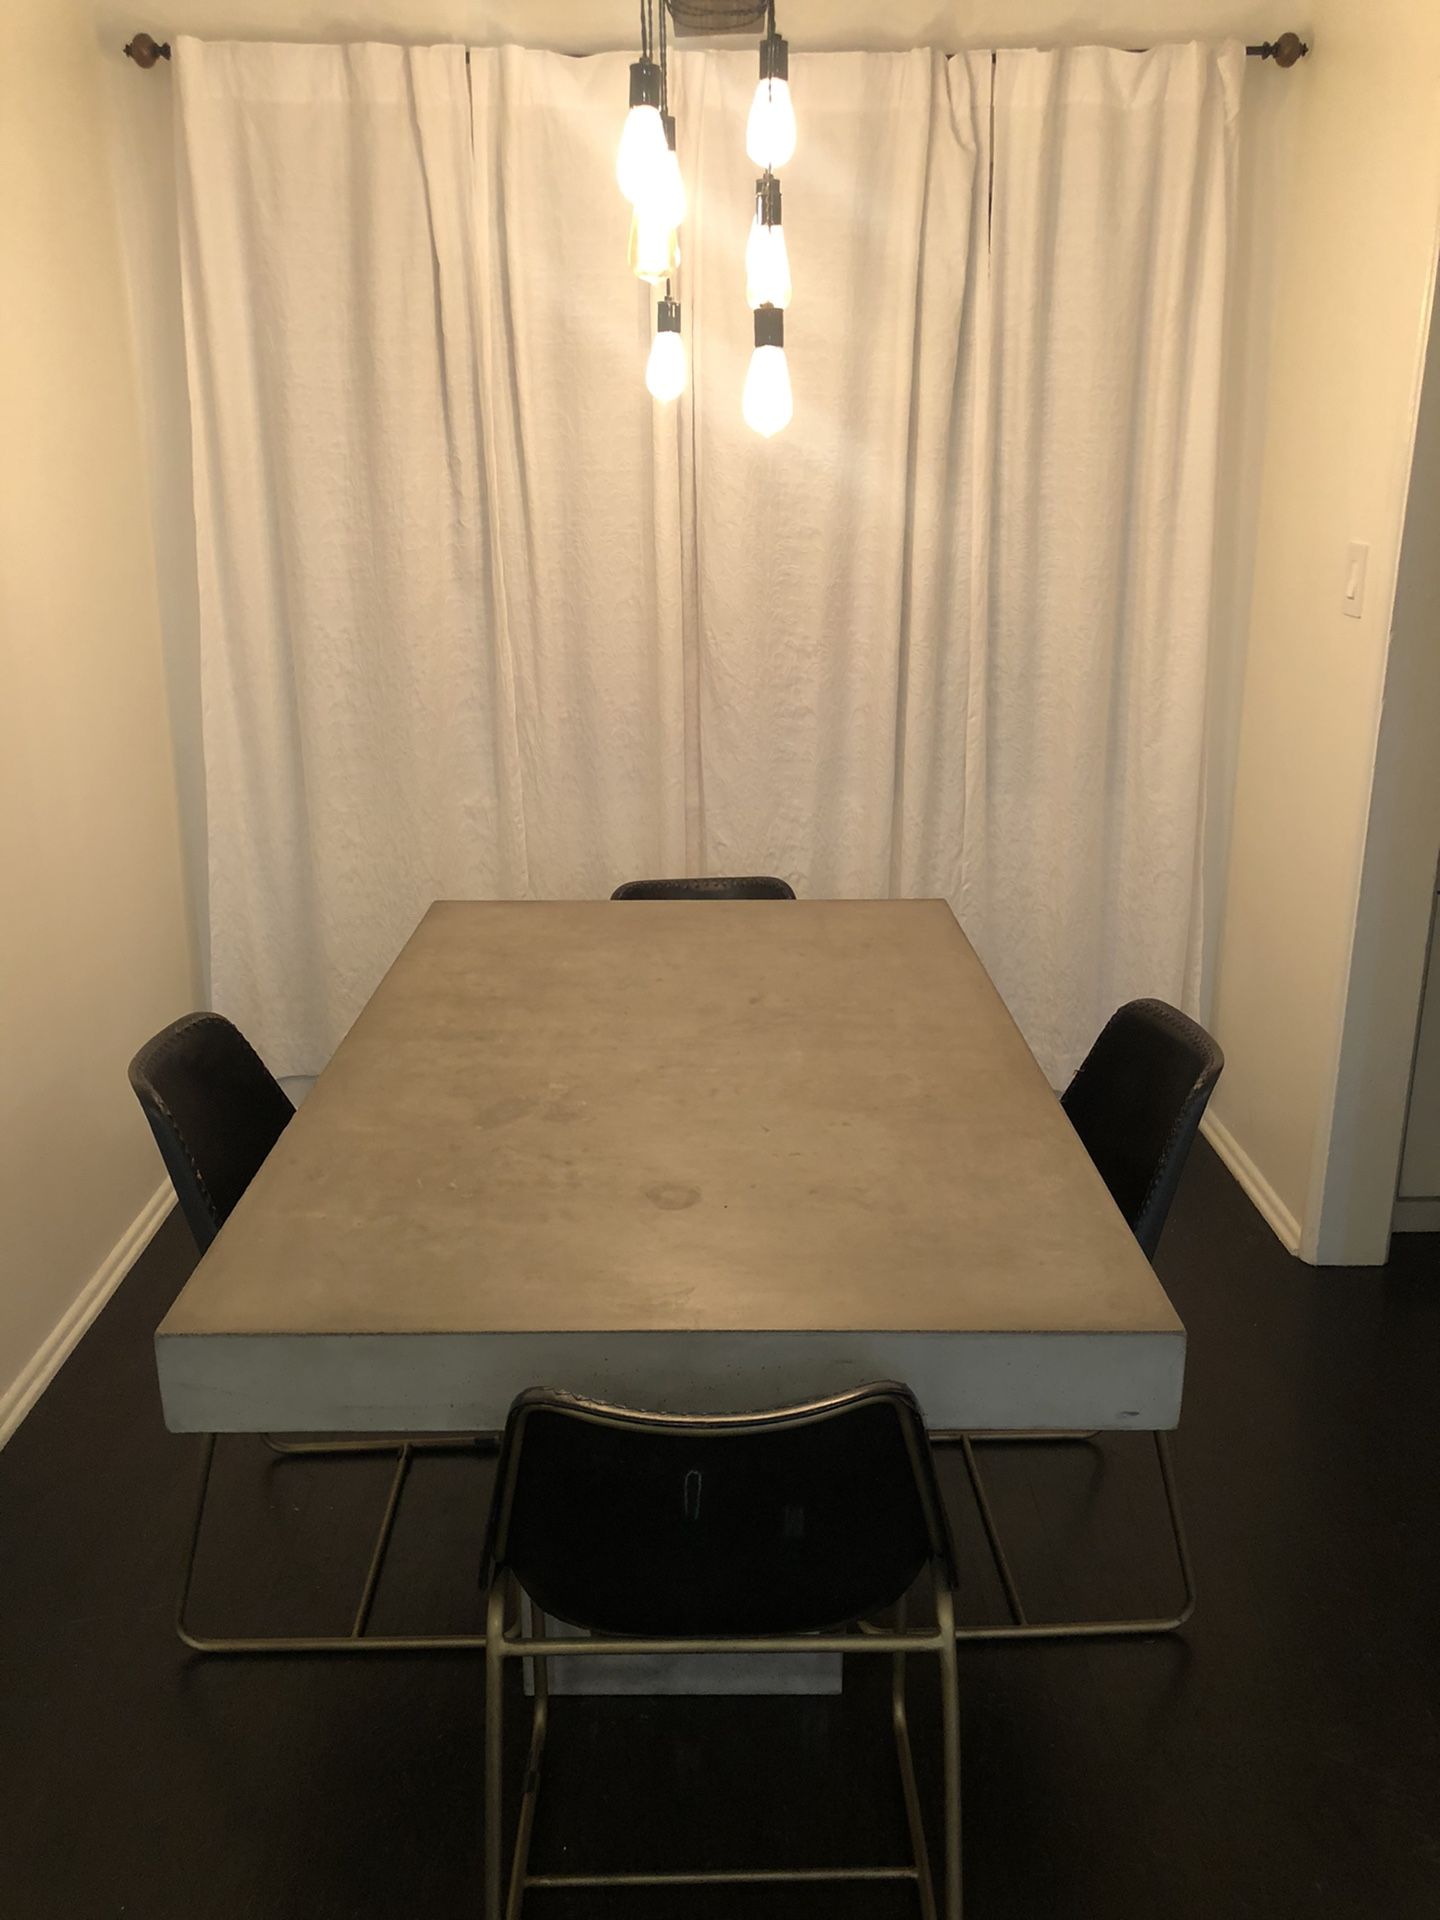 Dinning room table + chairs